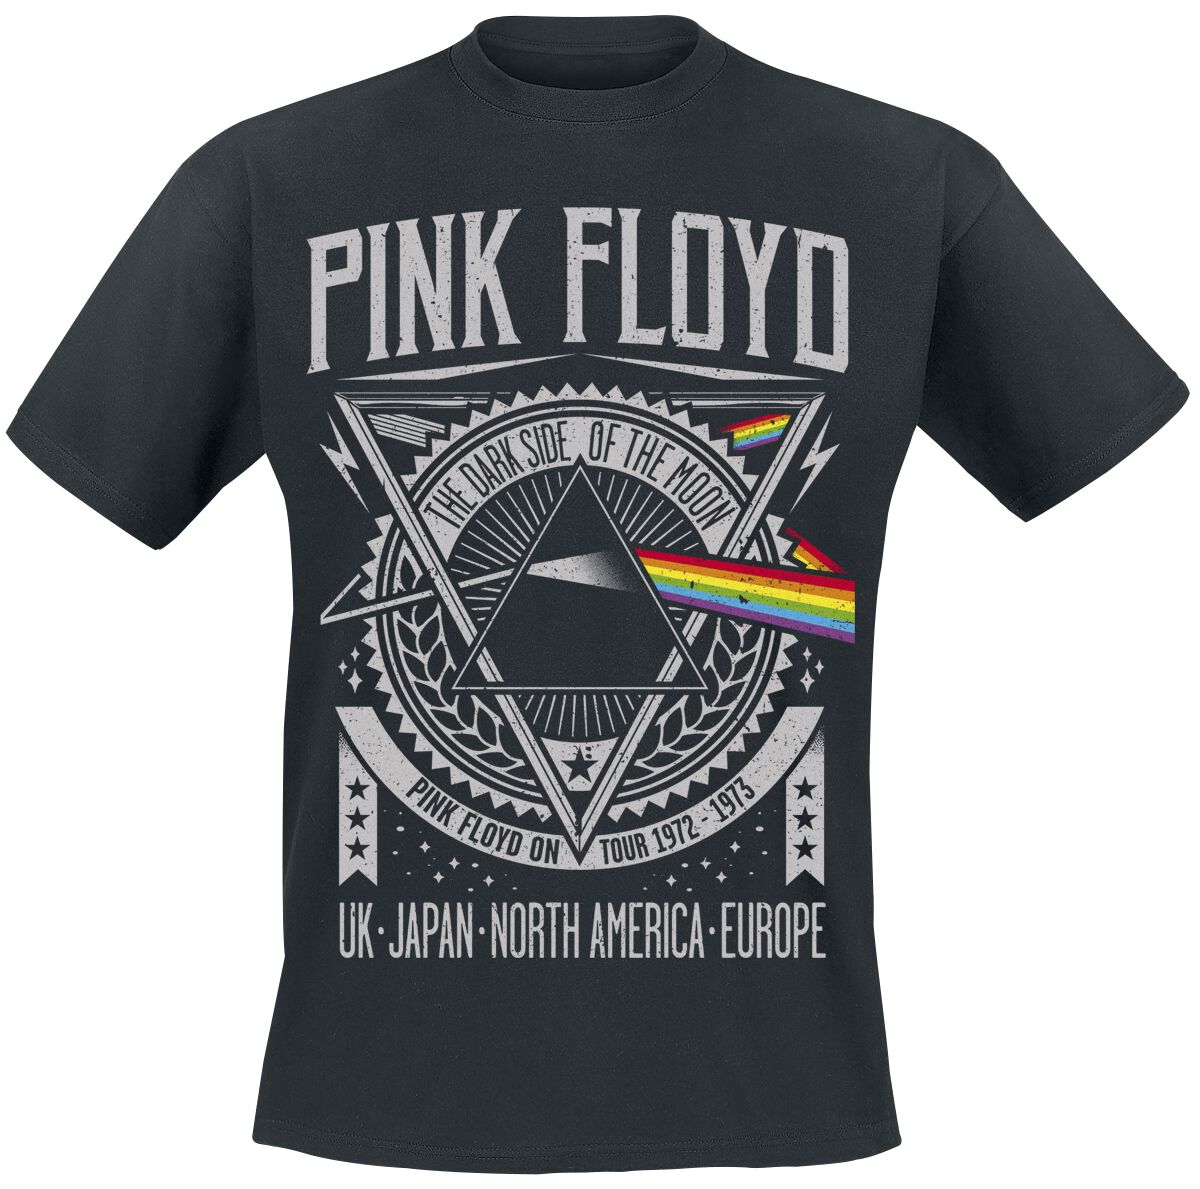 Image of T-Shirt di Pink Floyd - The Dark Side Of The Moon - Tour 1972 - M a 3XL - Uomo - nero